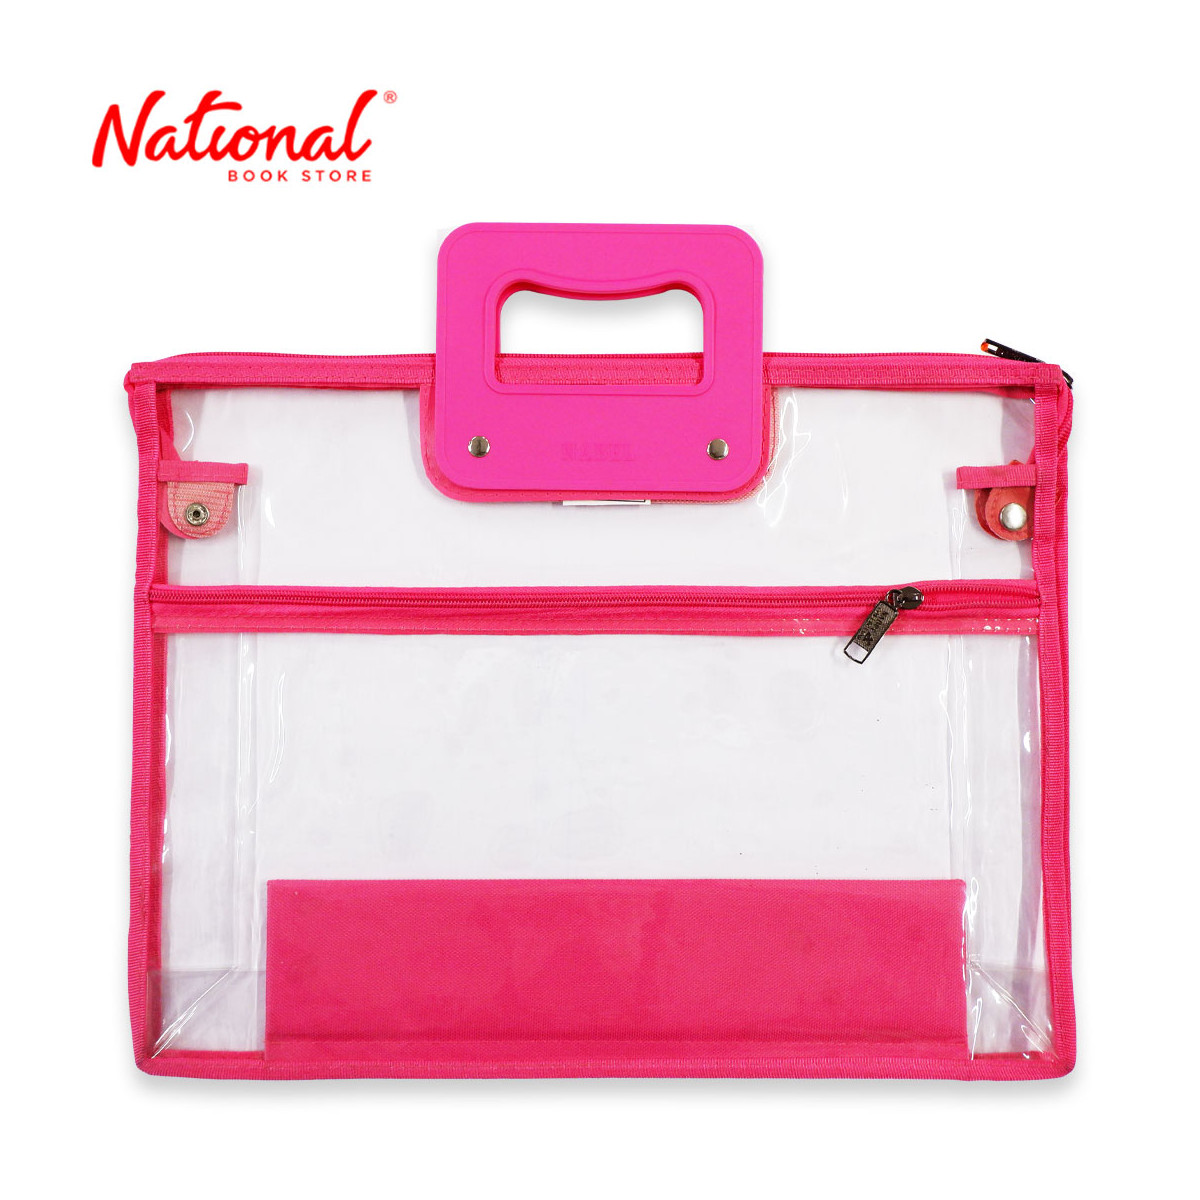 Nabel Plastic Envelope XEH706L Long With Handle Zipper Lock With Rear Pocket Clear Plastic, Pink